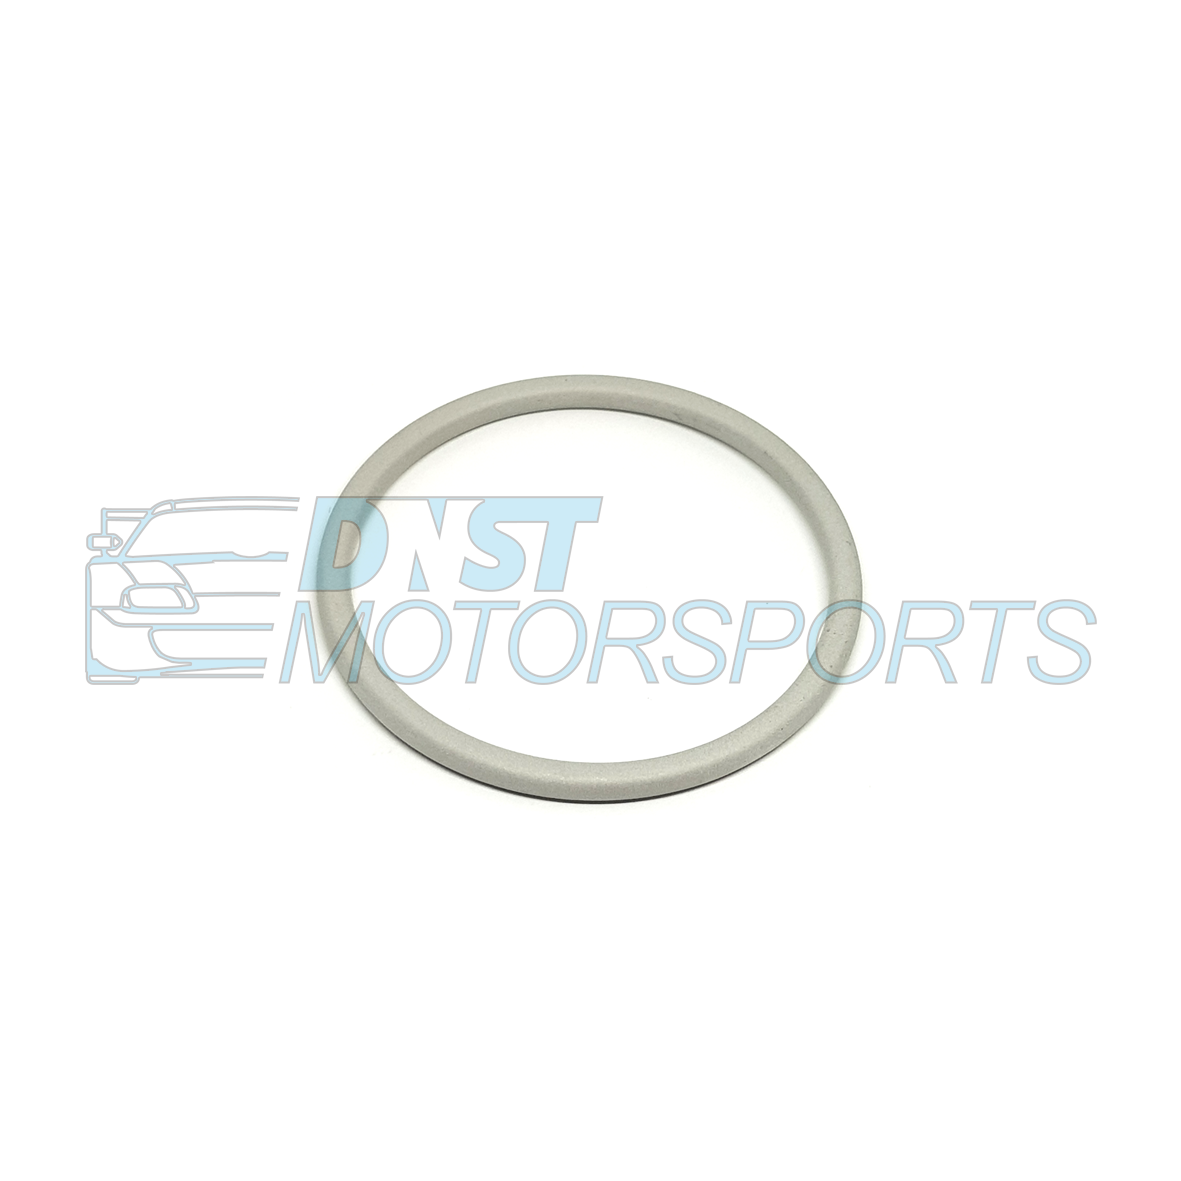 a round metal gasket on a white background with a DNST Motorsports watermark